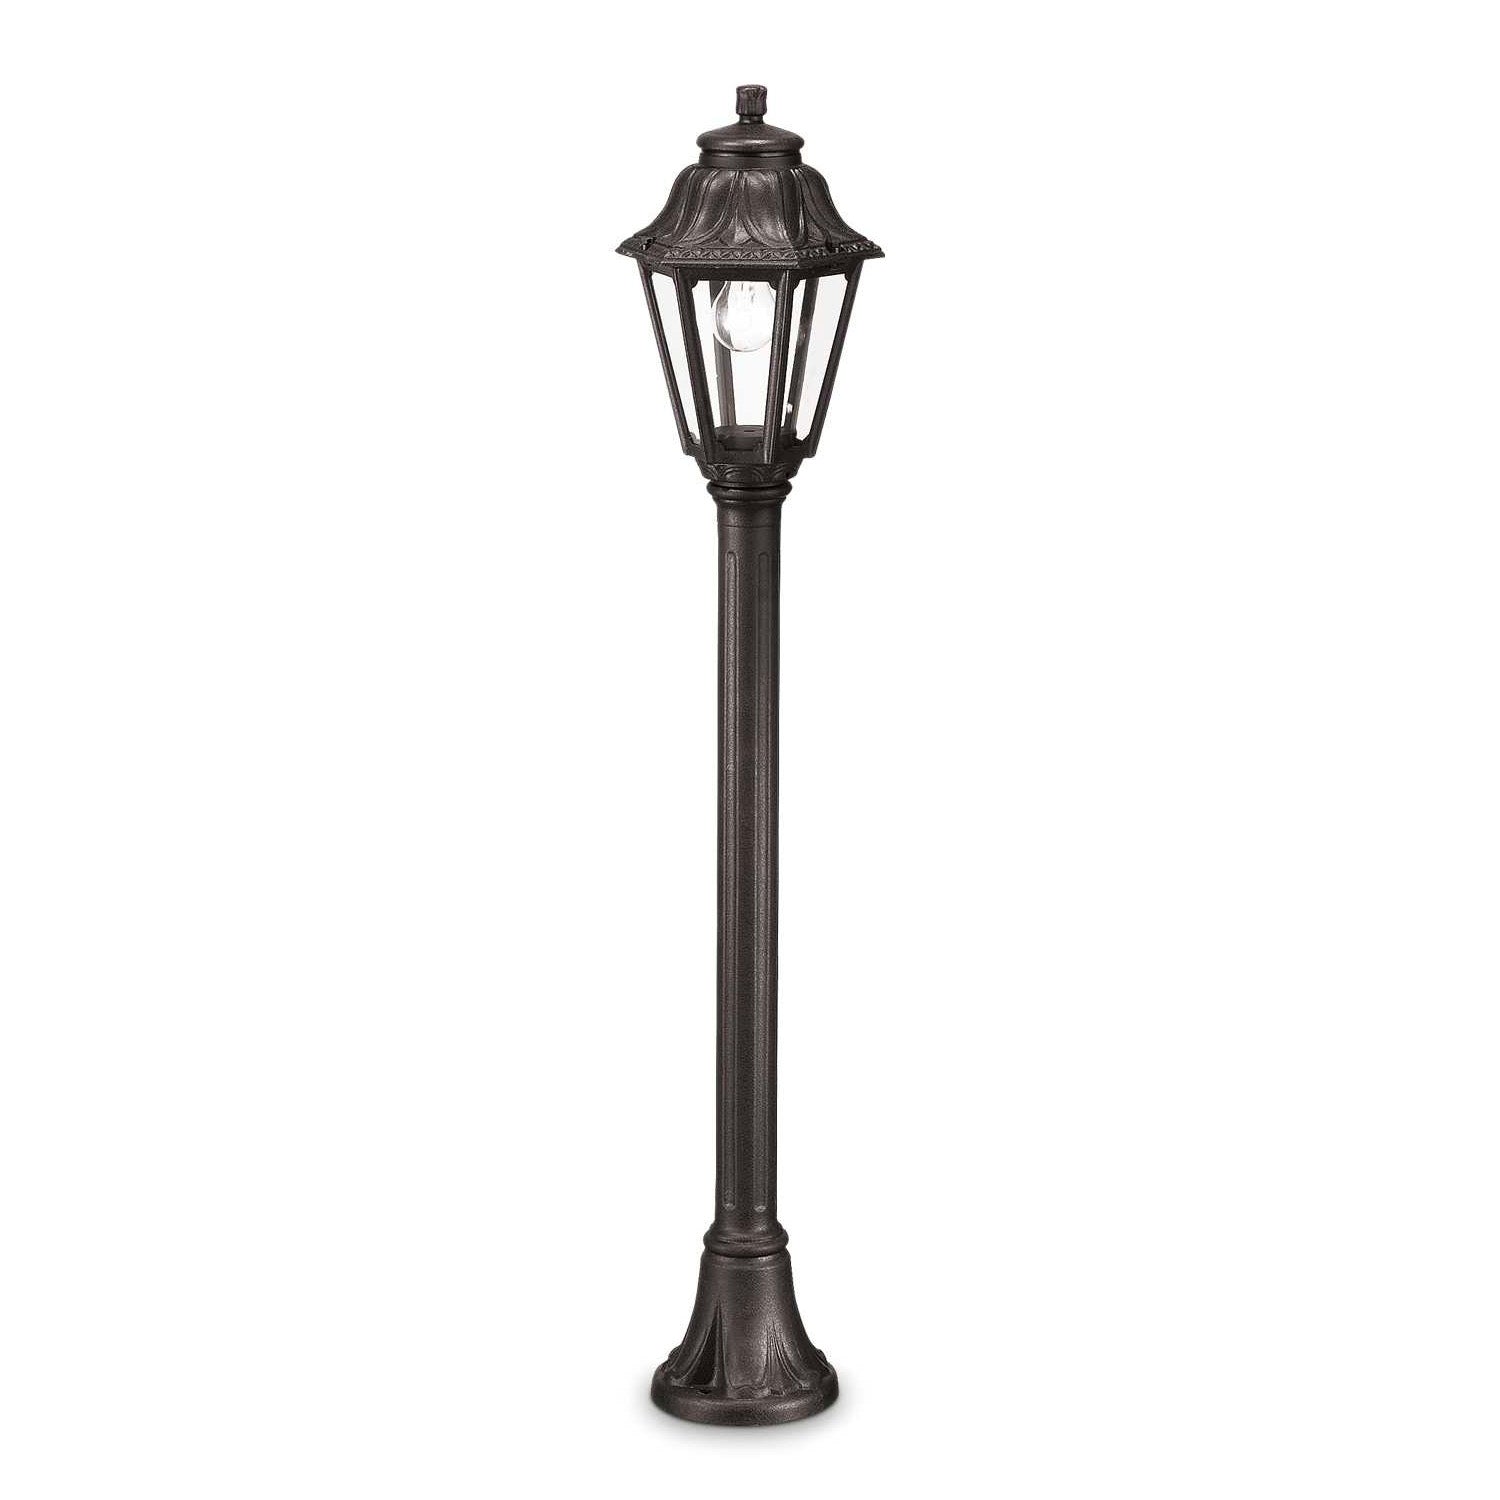 DAFNE - Old French style outdoor floor lamp